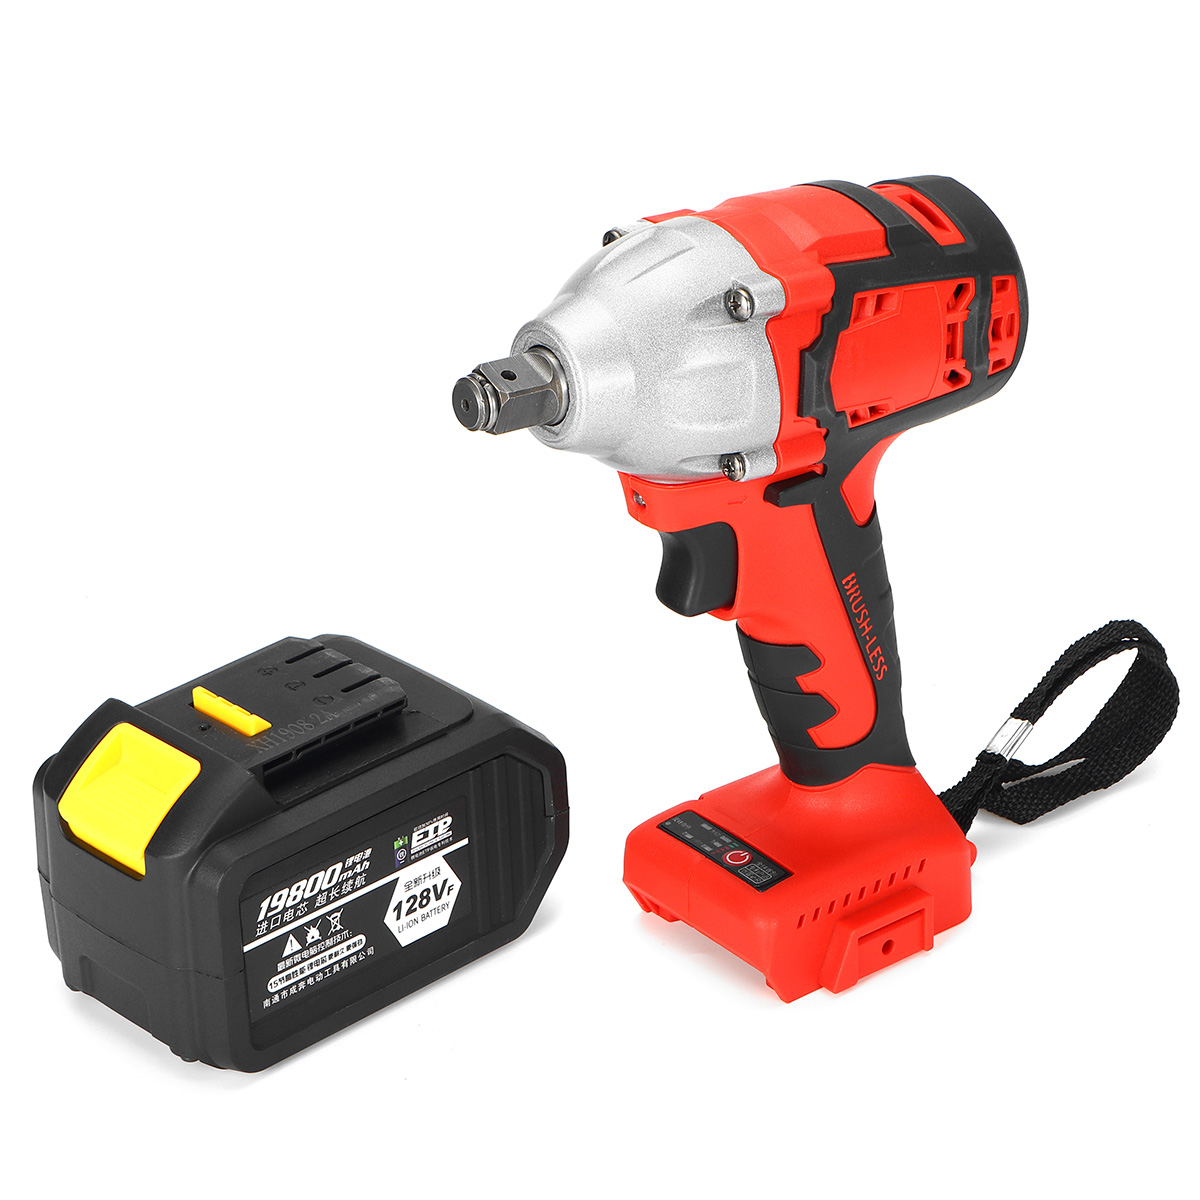 128VF-19800mah-Electric-Impact-Wrench-Brushless-Cordless-Drill-Tool-With-Battery-1685512-12